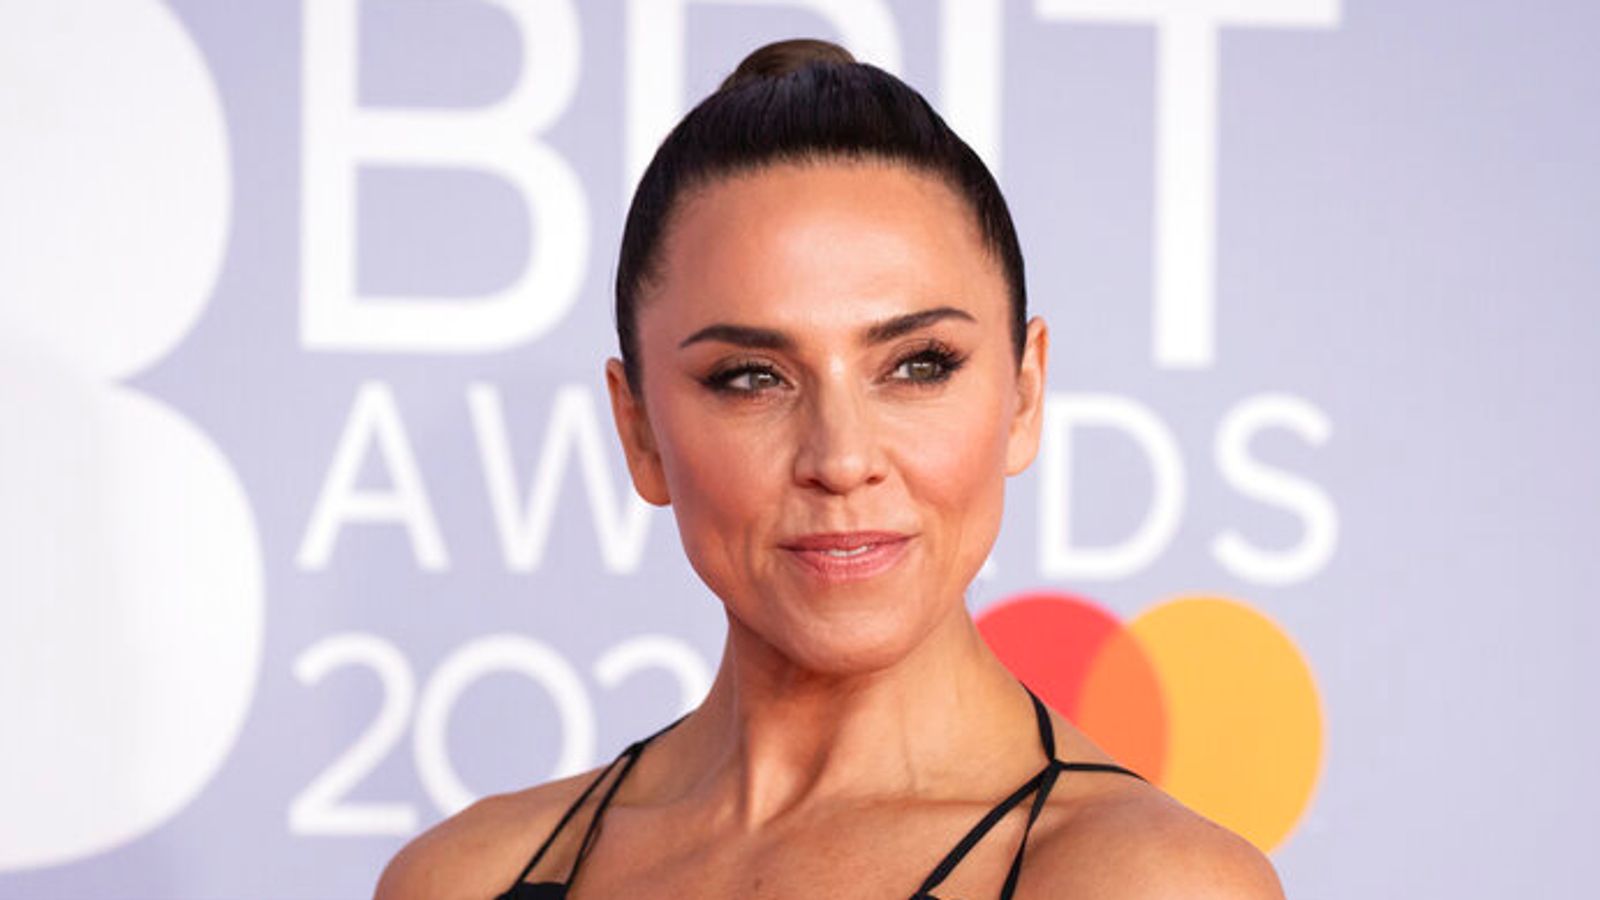 Mel C pulls out of Poland new year gig over 'issues that do not align with communities I support'